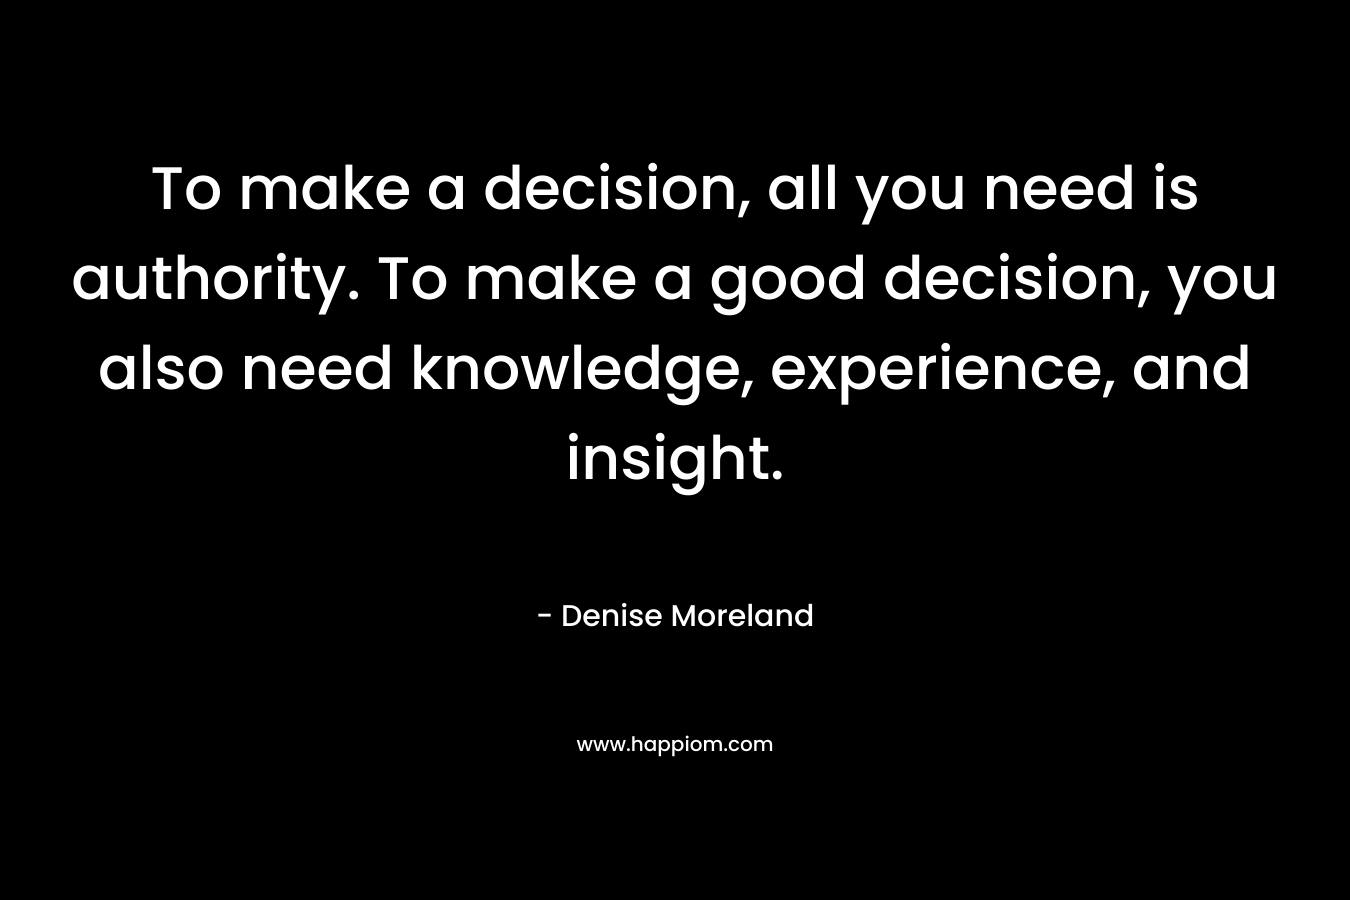 To make a decision, all you need is authority. To make a good decision, you also need knowledge, experience, and insight.